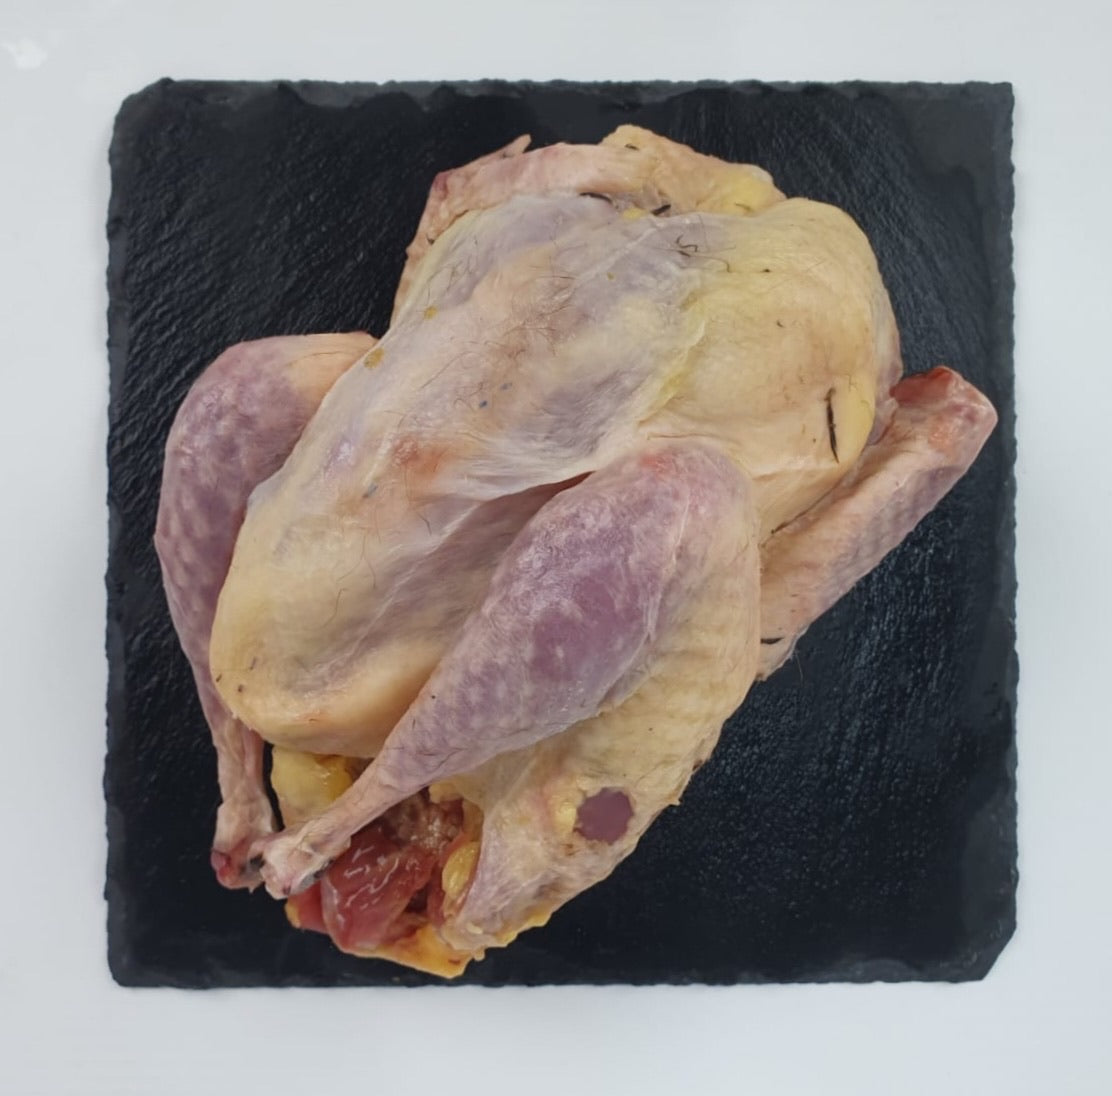 Halal Pheasant with Skin on - Whole (600-800g)